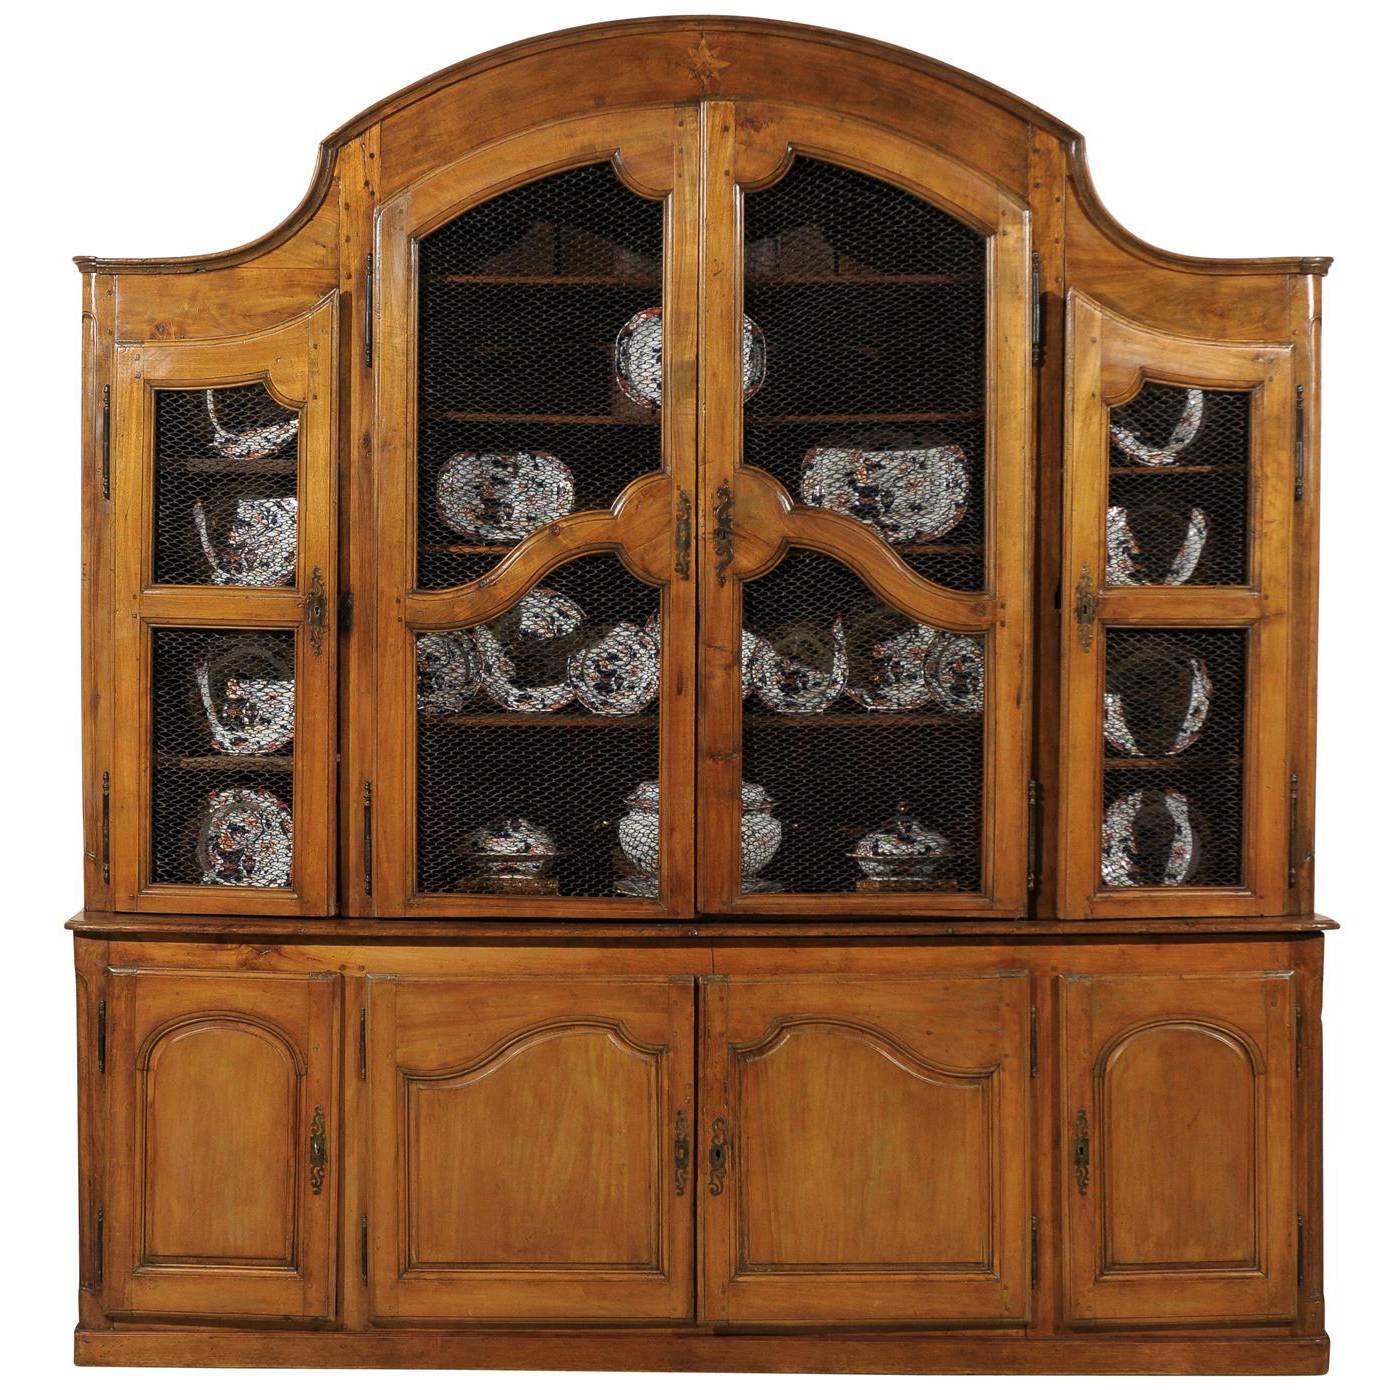 Large 18th Century French Provincial Bibliotheque Cabinet in Fruitwood